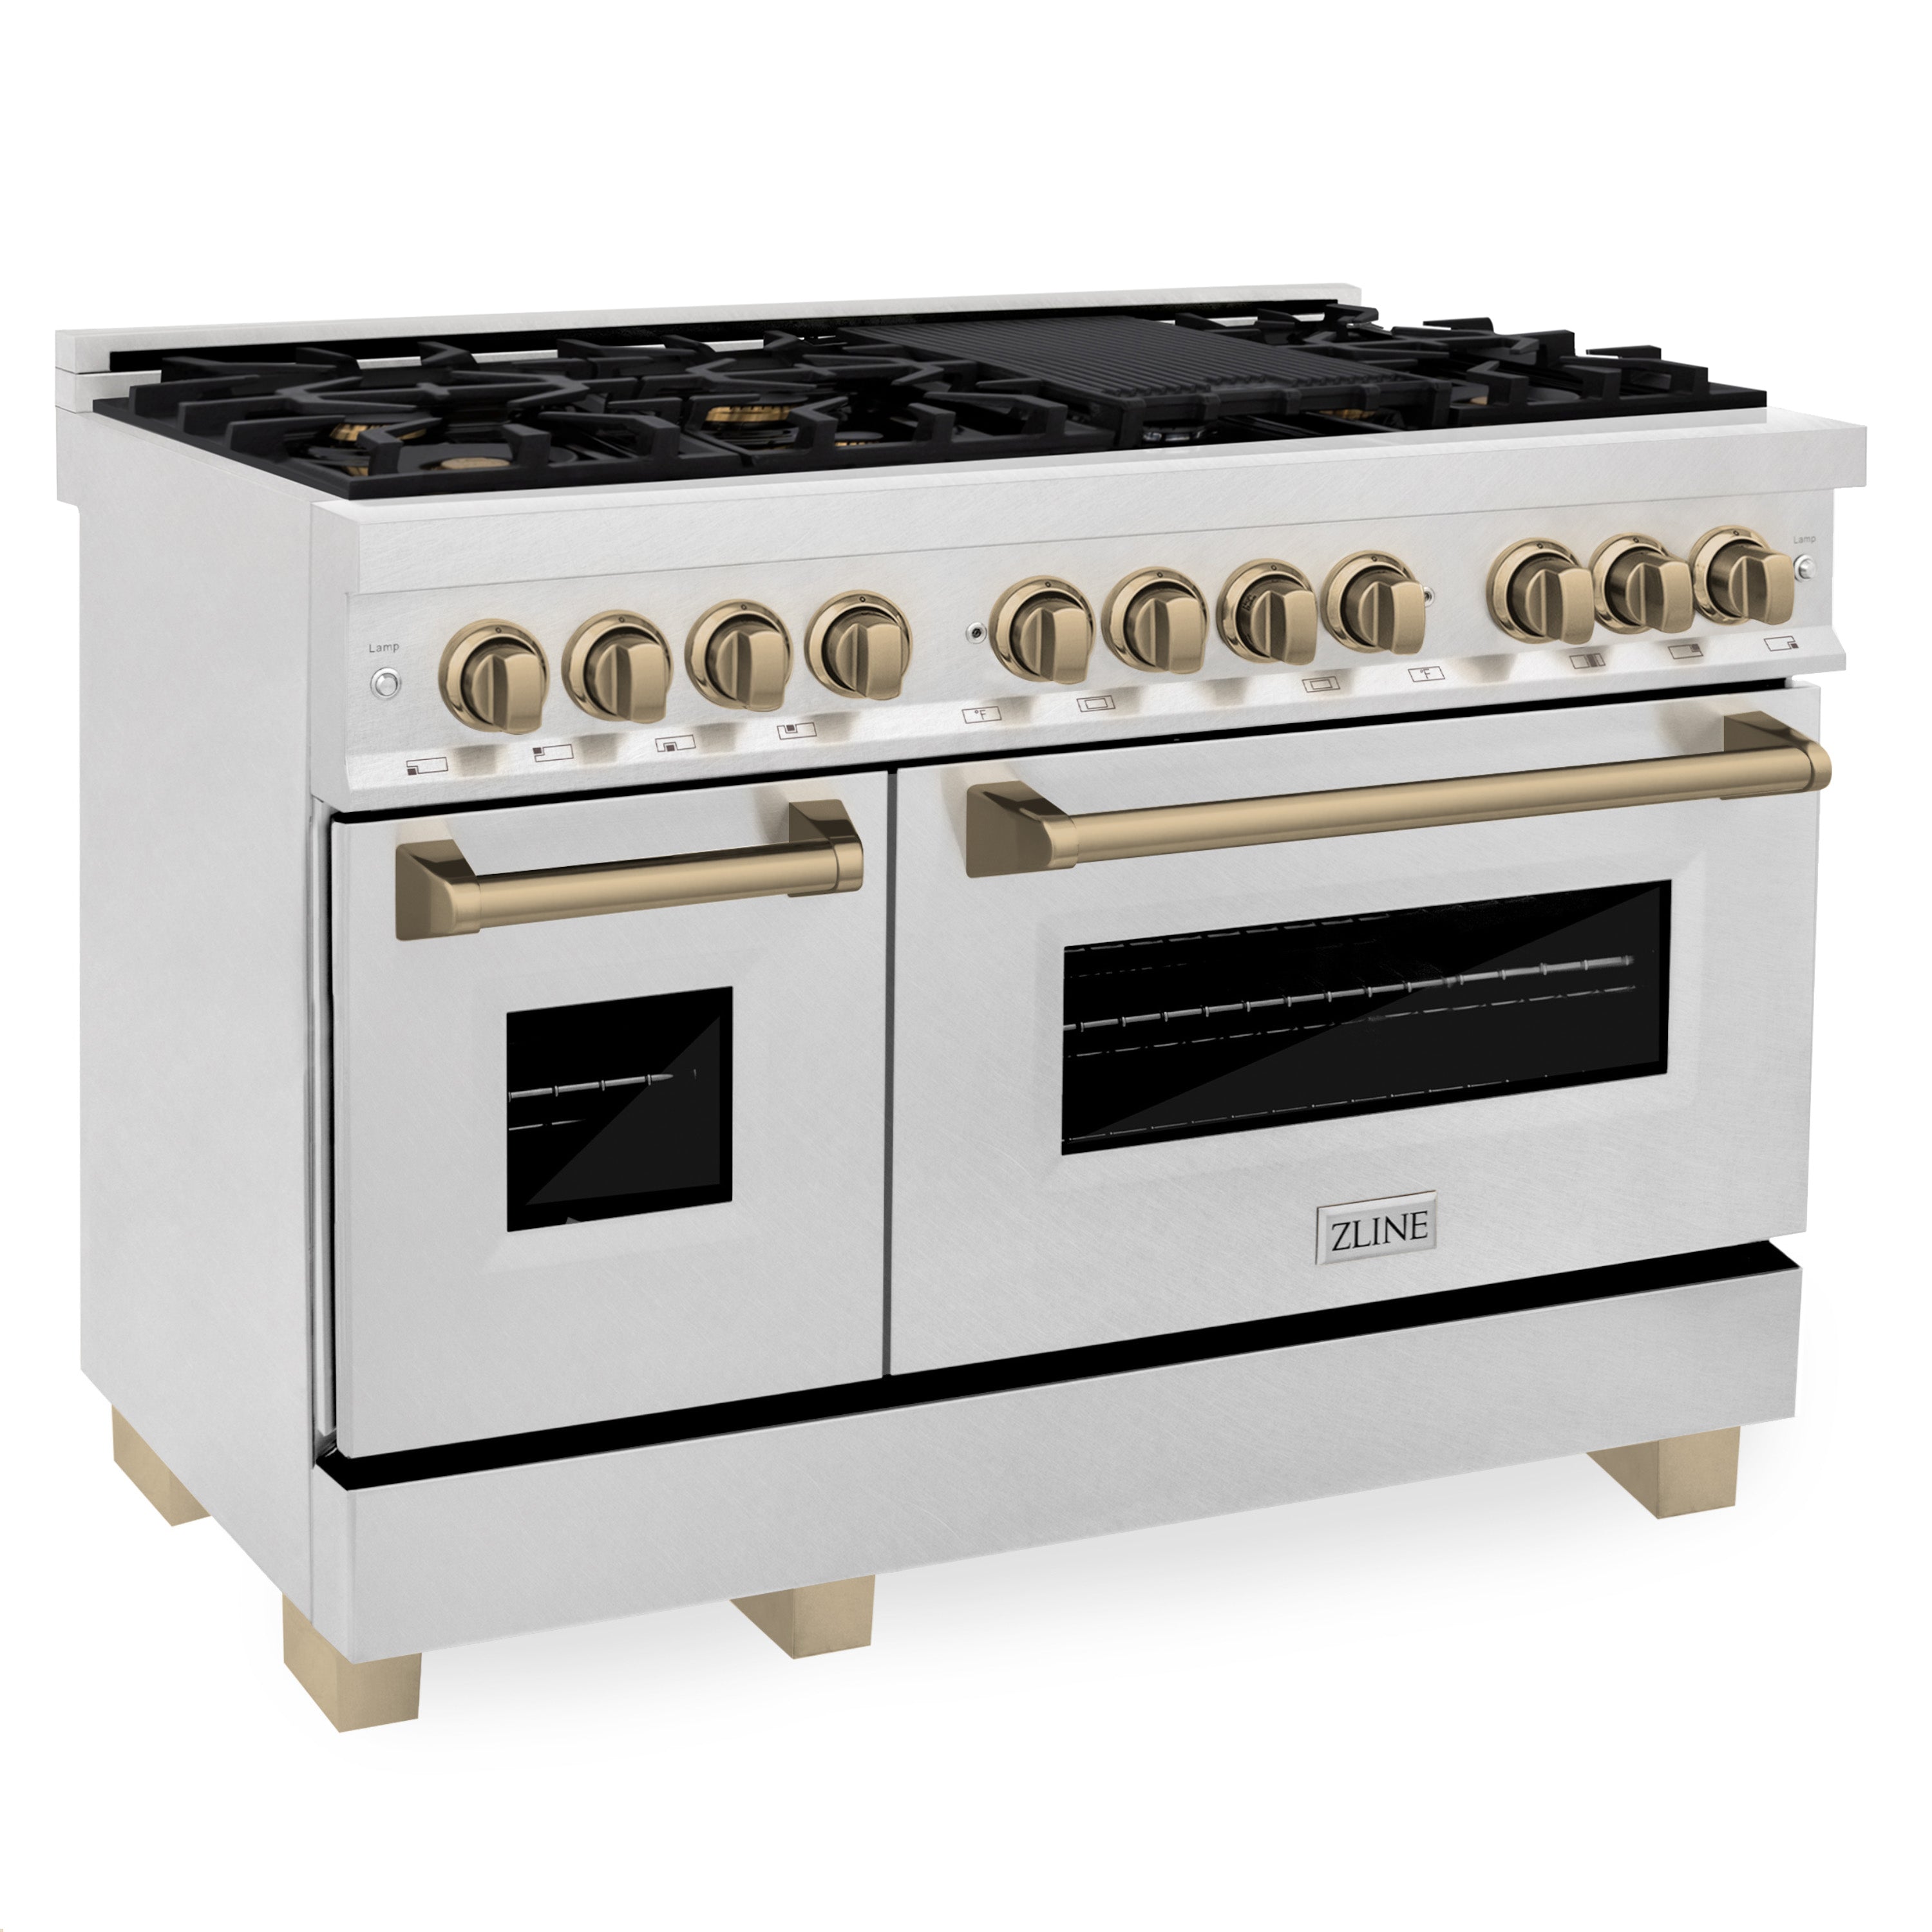 ZLINE Autograph Edition 48" 6.0 cu. ft. Dual Fuel Range with Gas Stove and Electric Oven in DuraSnow® Stainless Steel with Champagne Bronze Accents (RASZ-SN-48-CB)